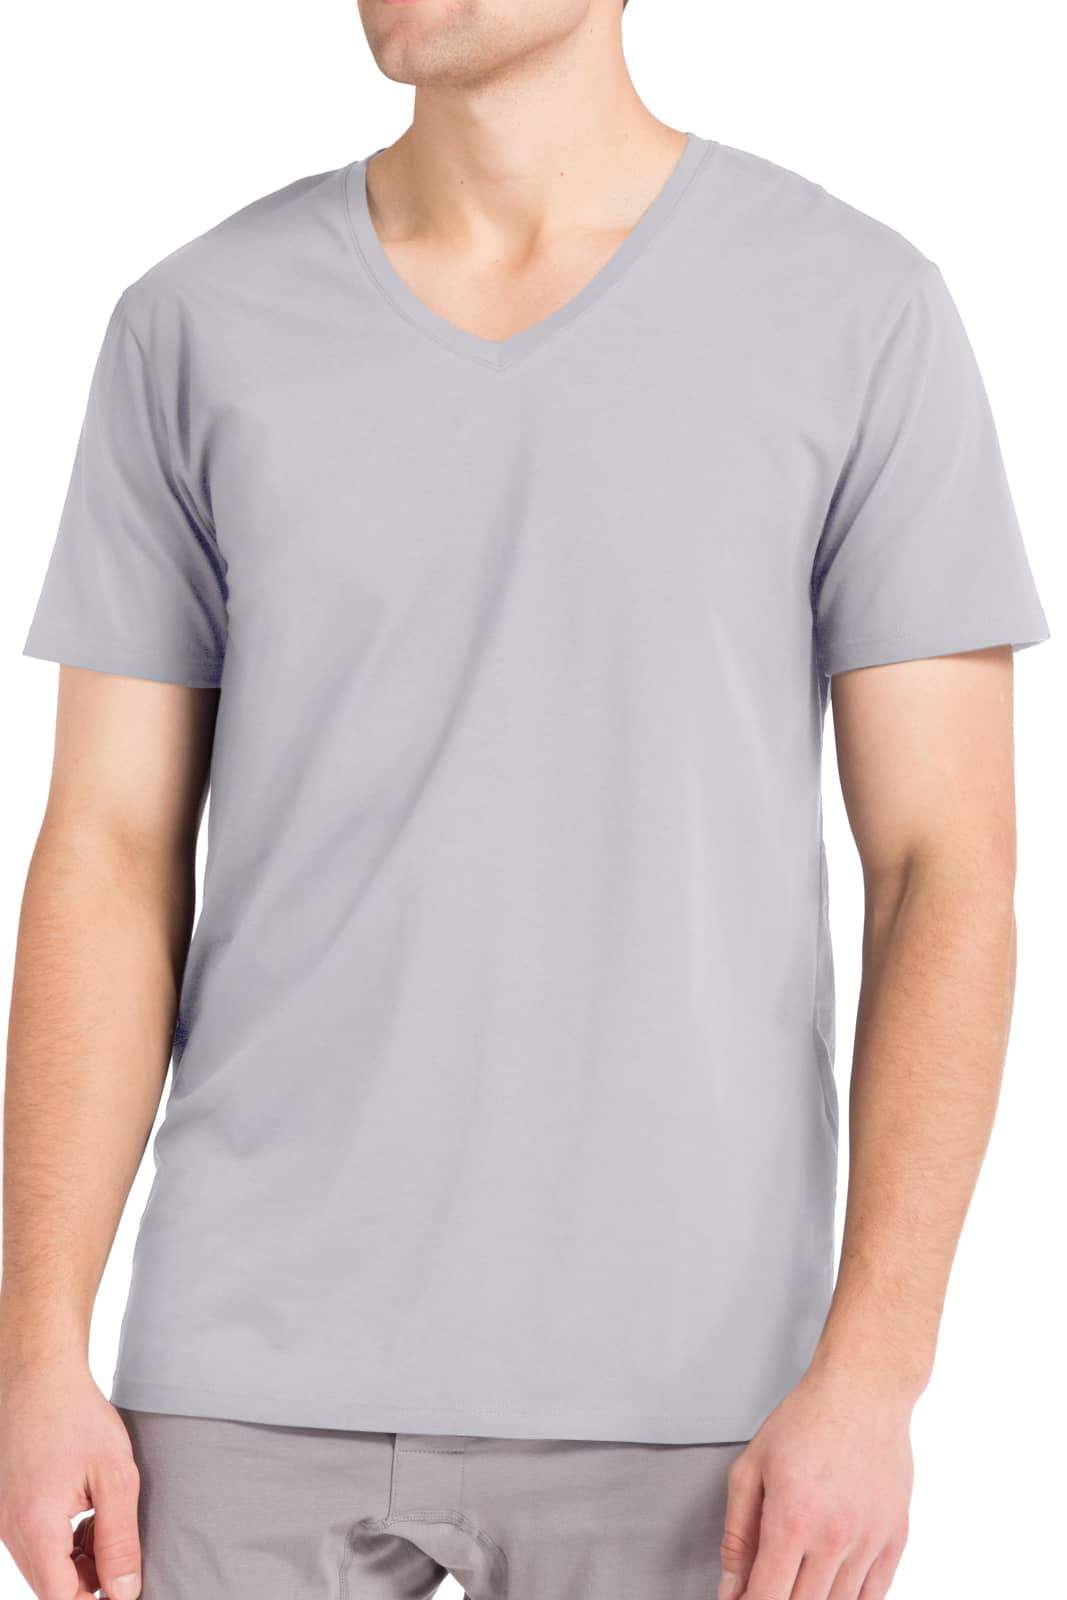 Men's Classic Fit Soft Stretch V-Neck Undershirt Mens>Casual>Tops Fishers Finery Sky Gray Small Single Pack